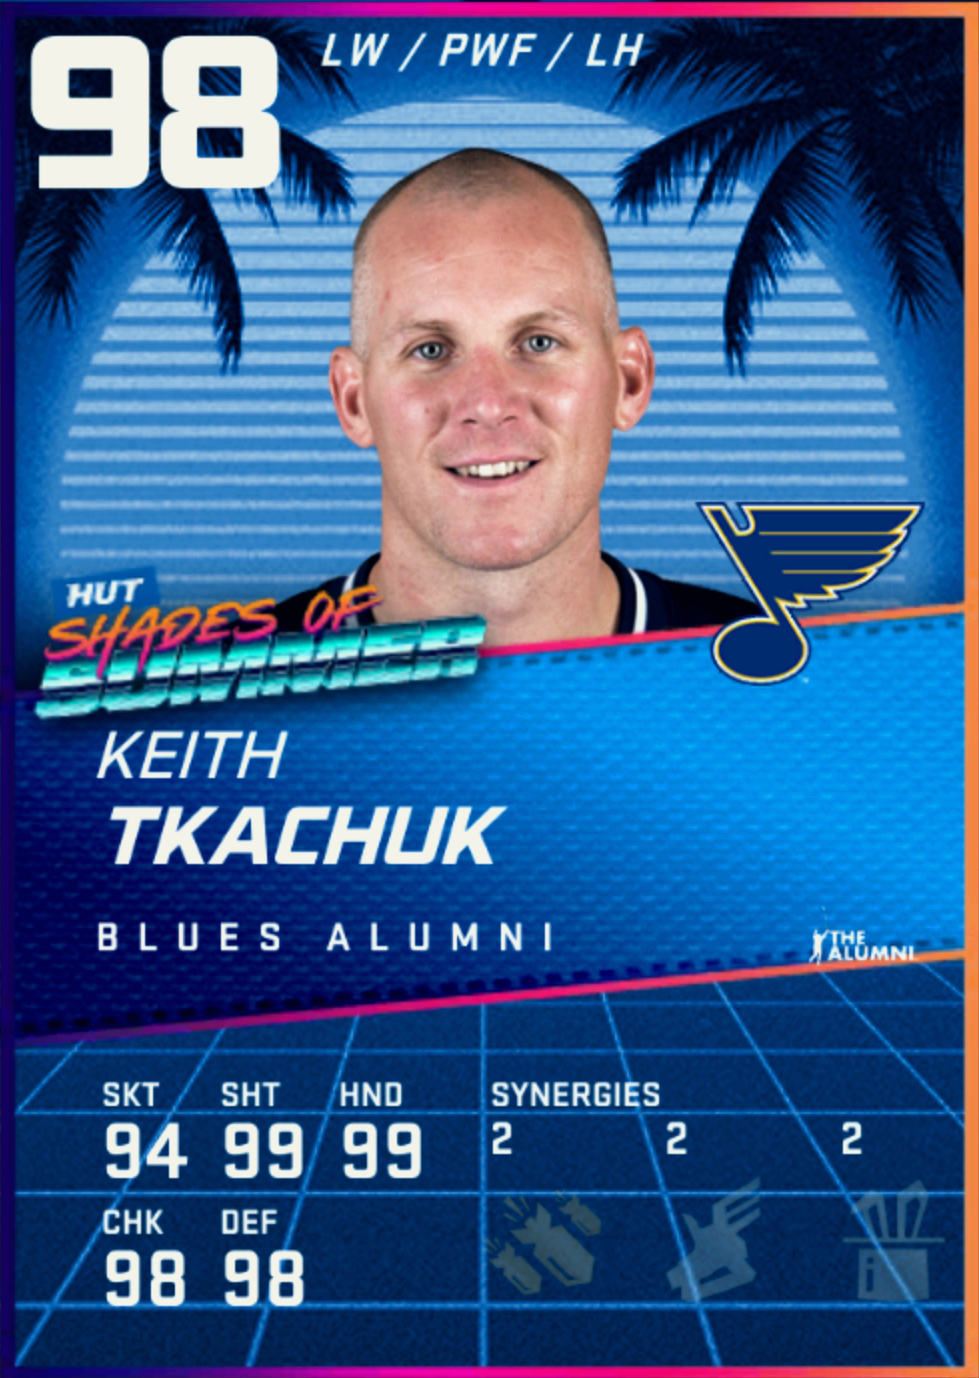 Keith Tkachuk - Stats & Facts - Elite Prospects